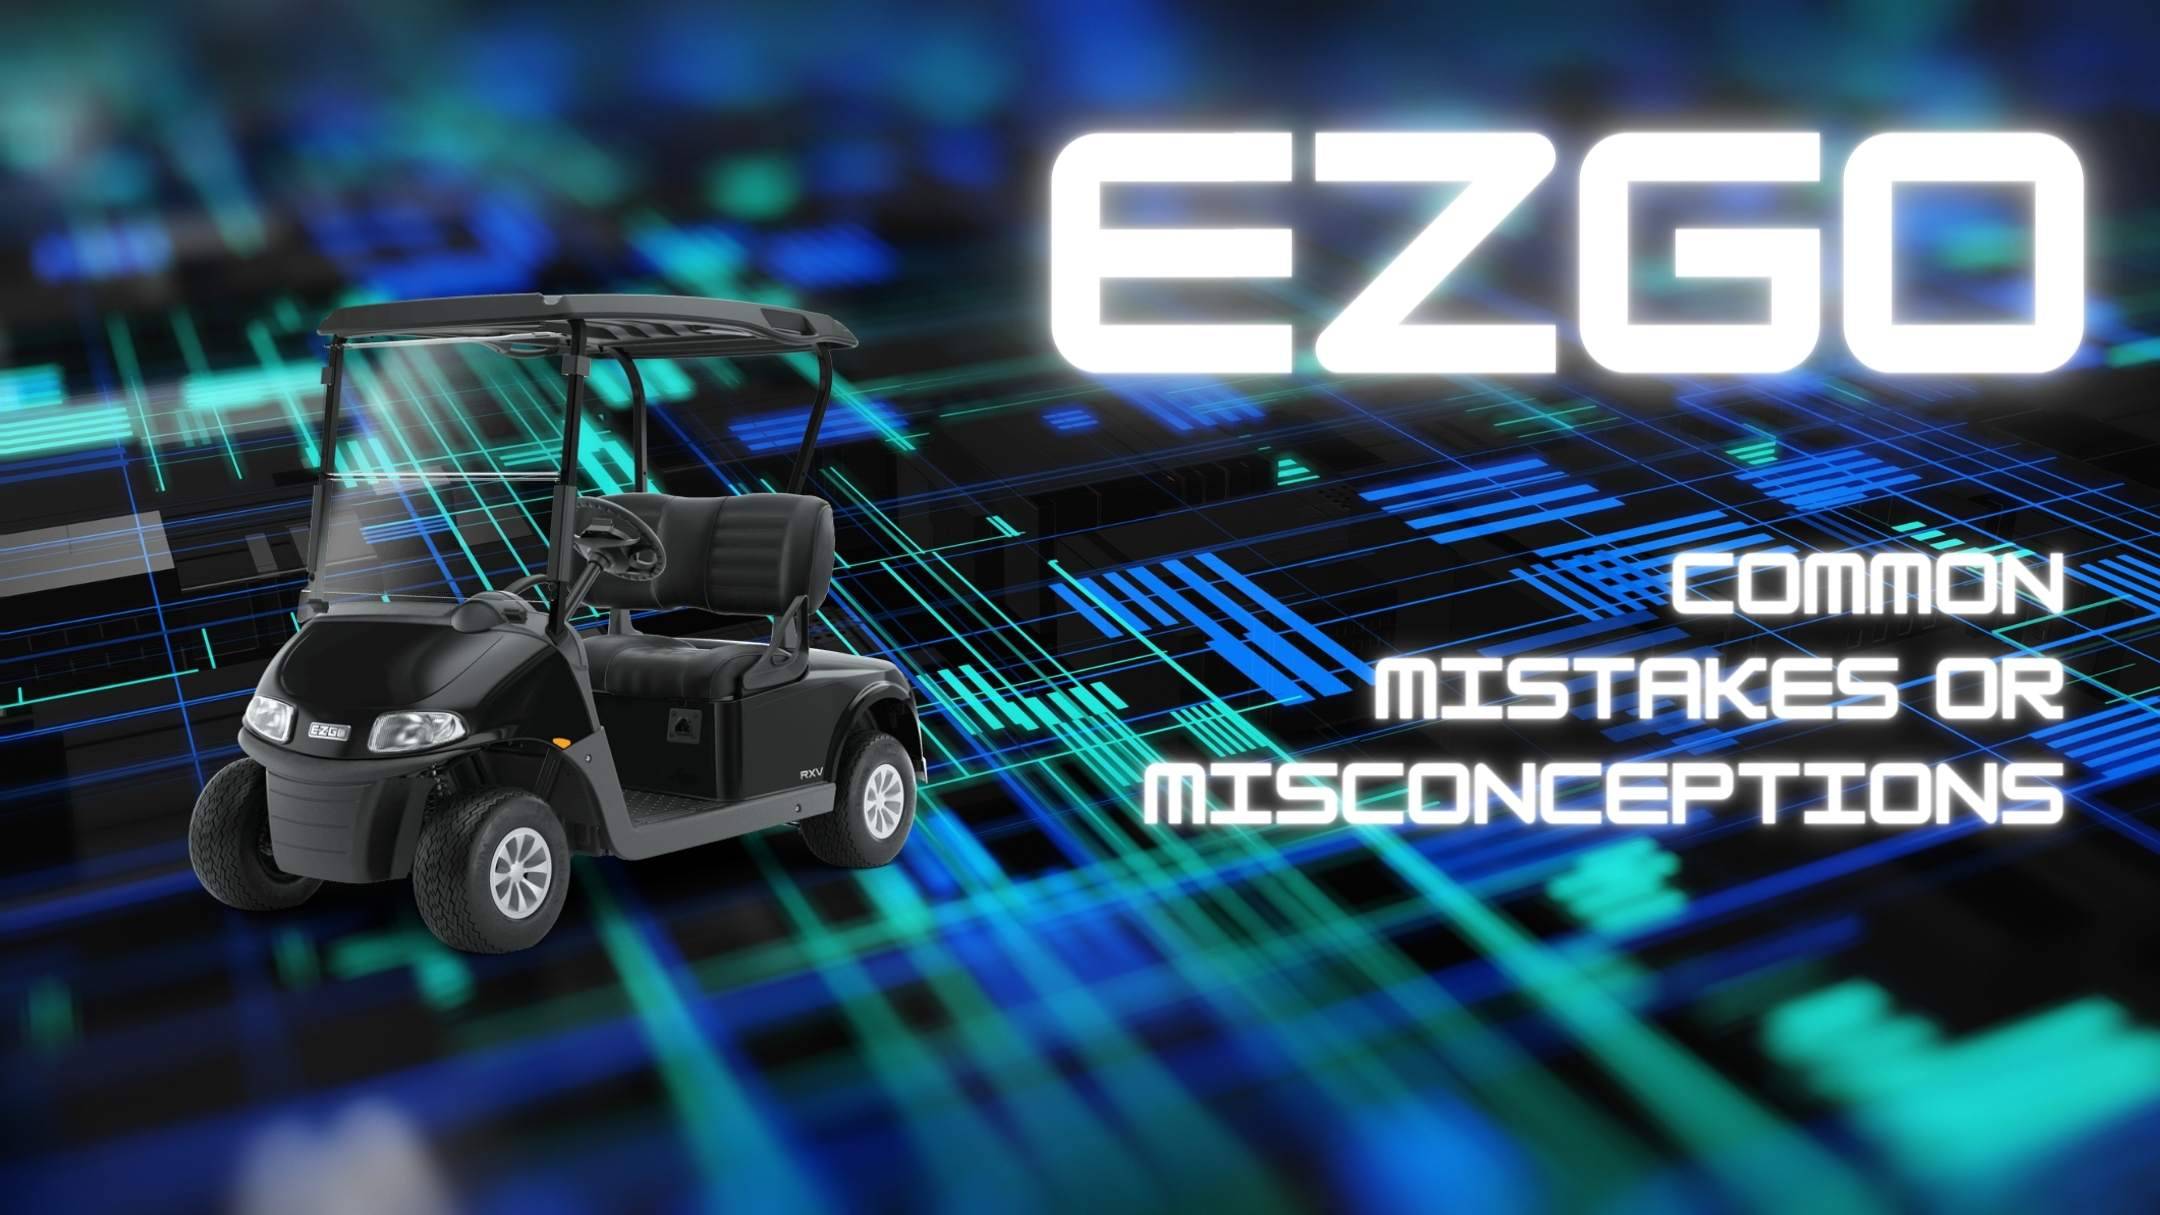 What are the common mistakes or misconceptions when trying to identify an EZGO golf cart